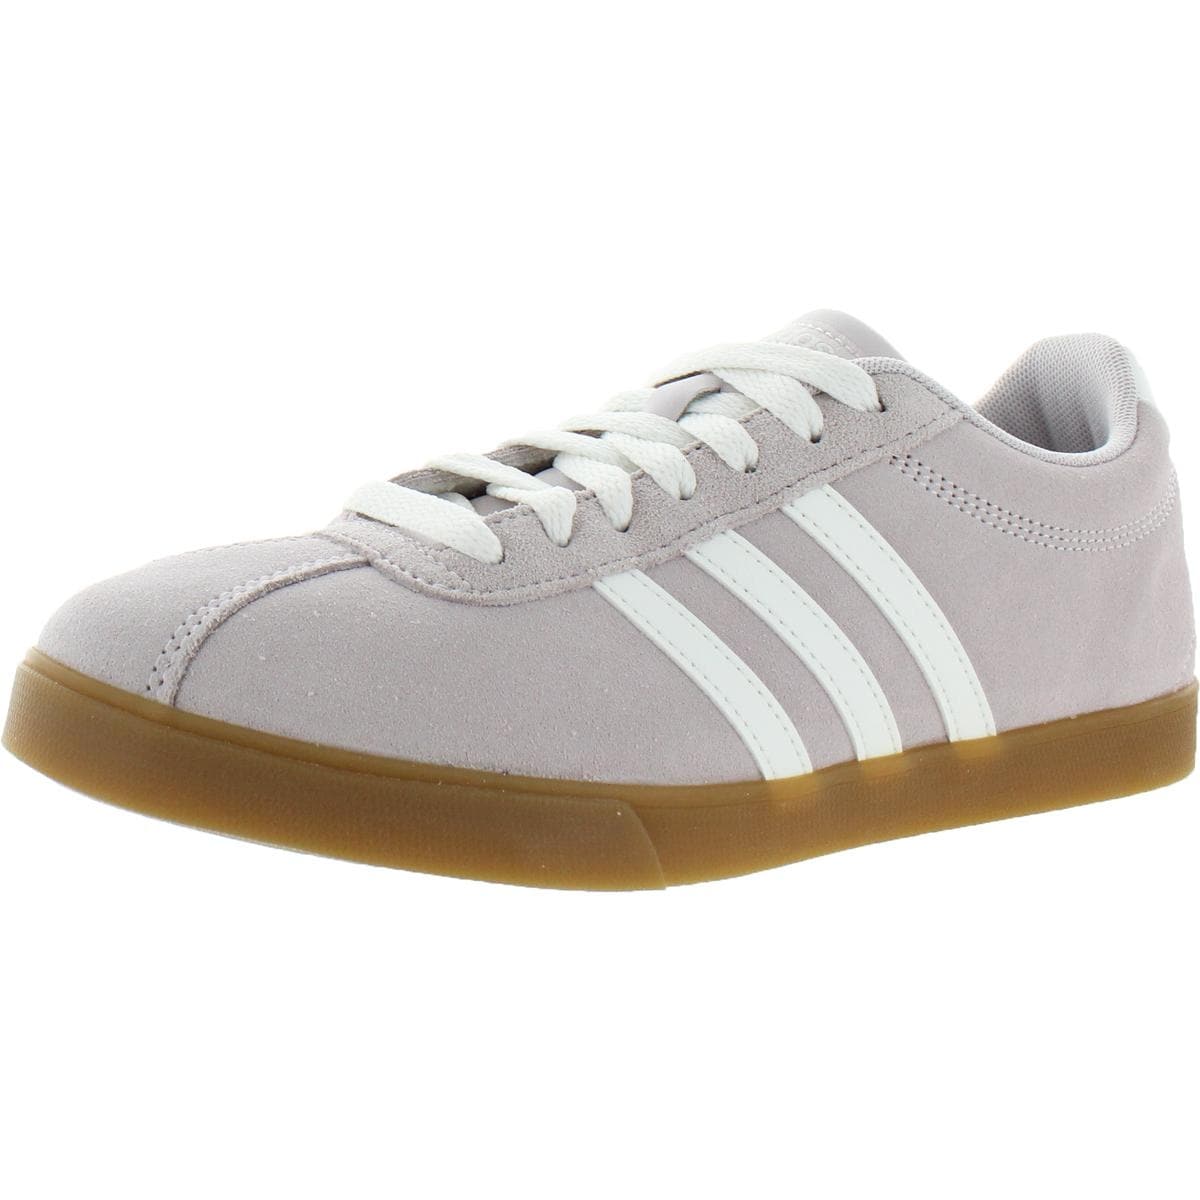 adidas suede court shoes